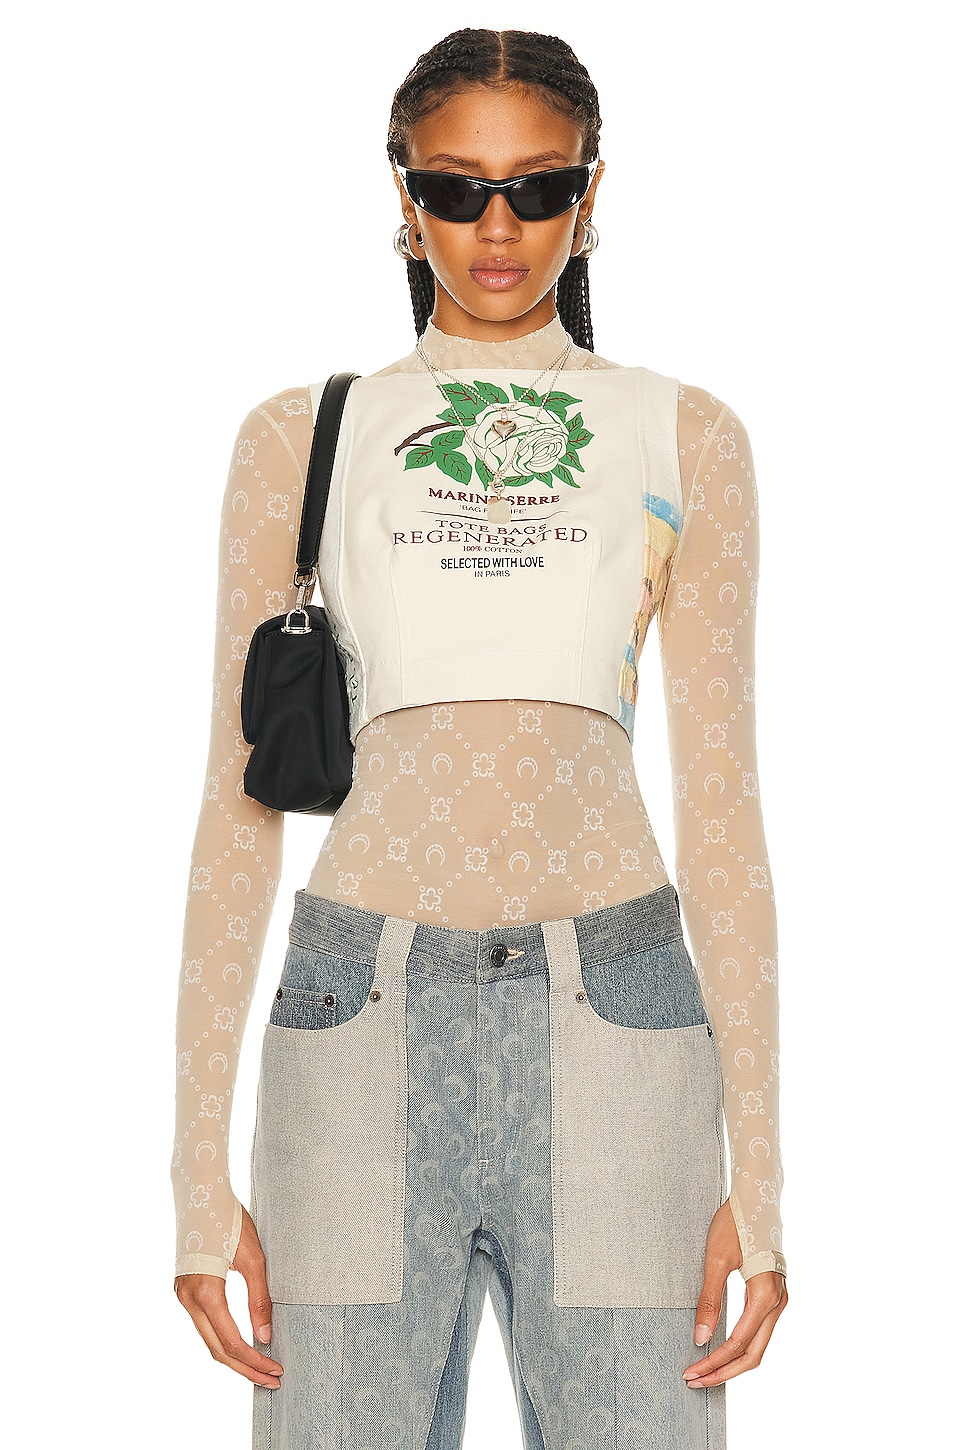 Image 1 of Marine Serre Regenerated Tote Bags Bustier Top in White